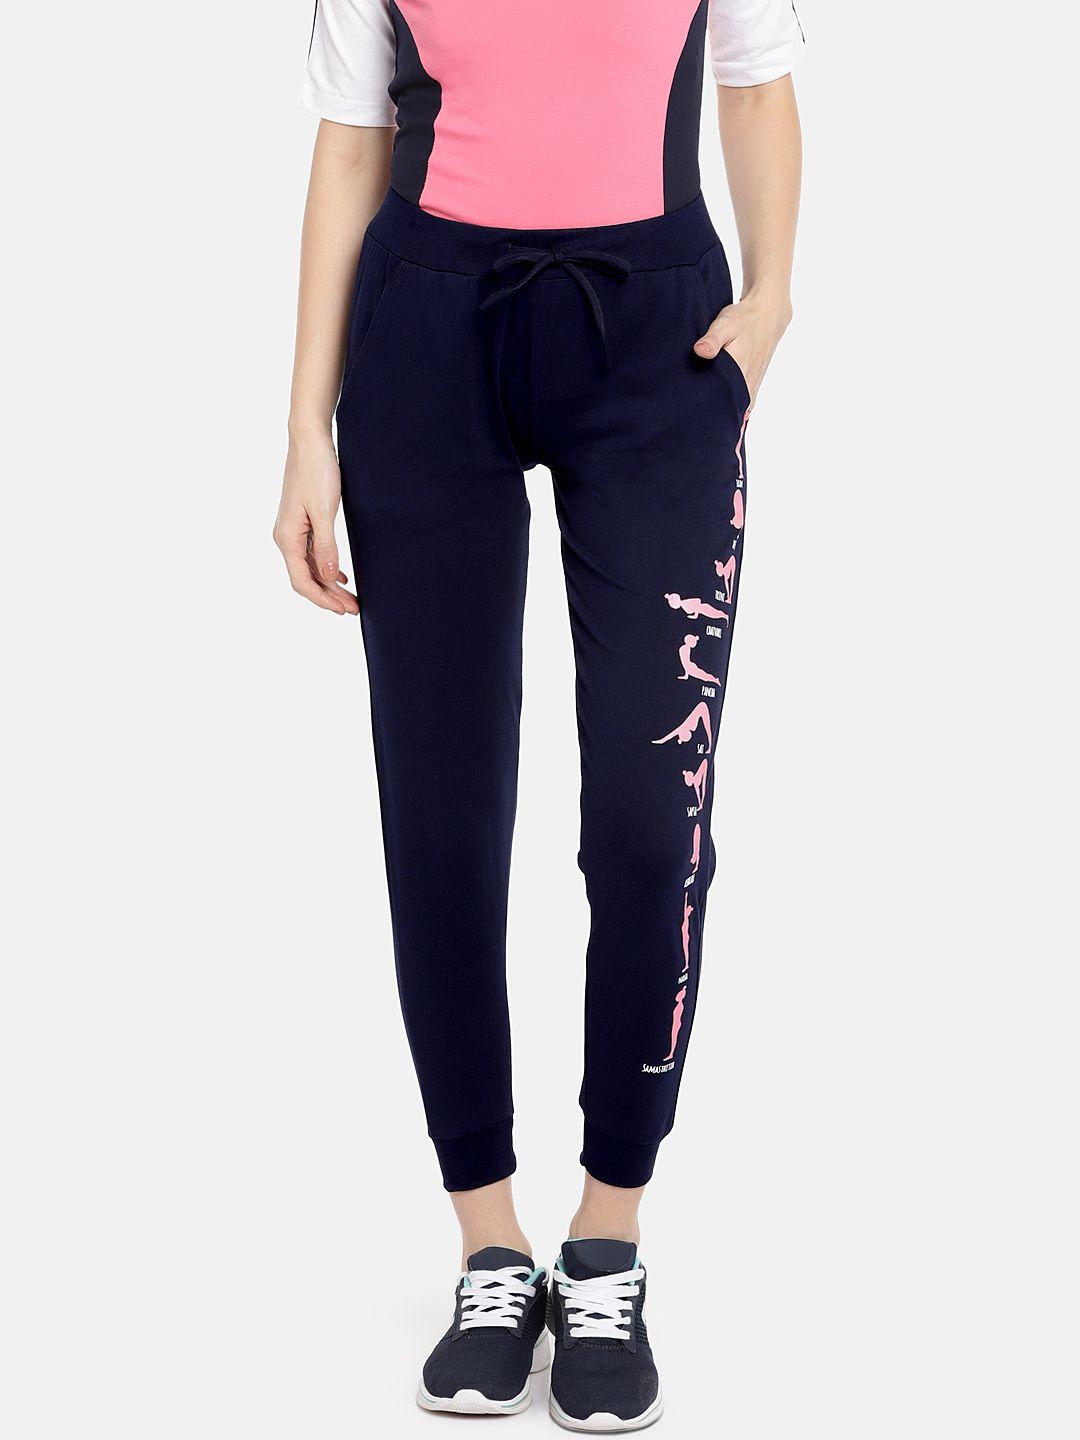 tuna london women navy blue and pink solid joggers